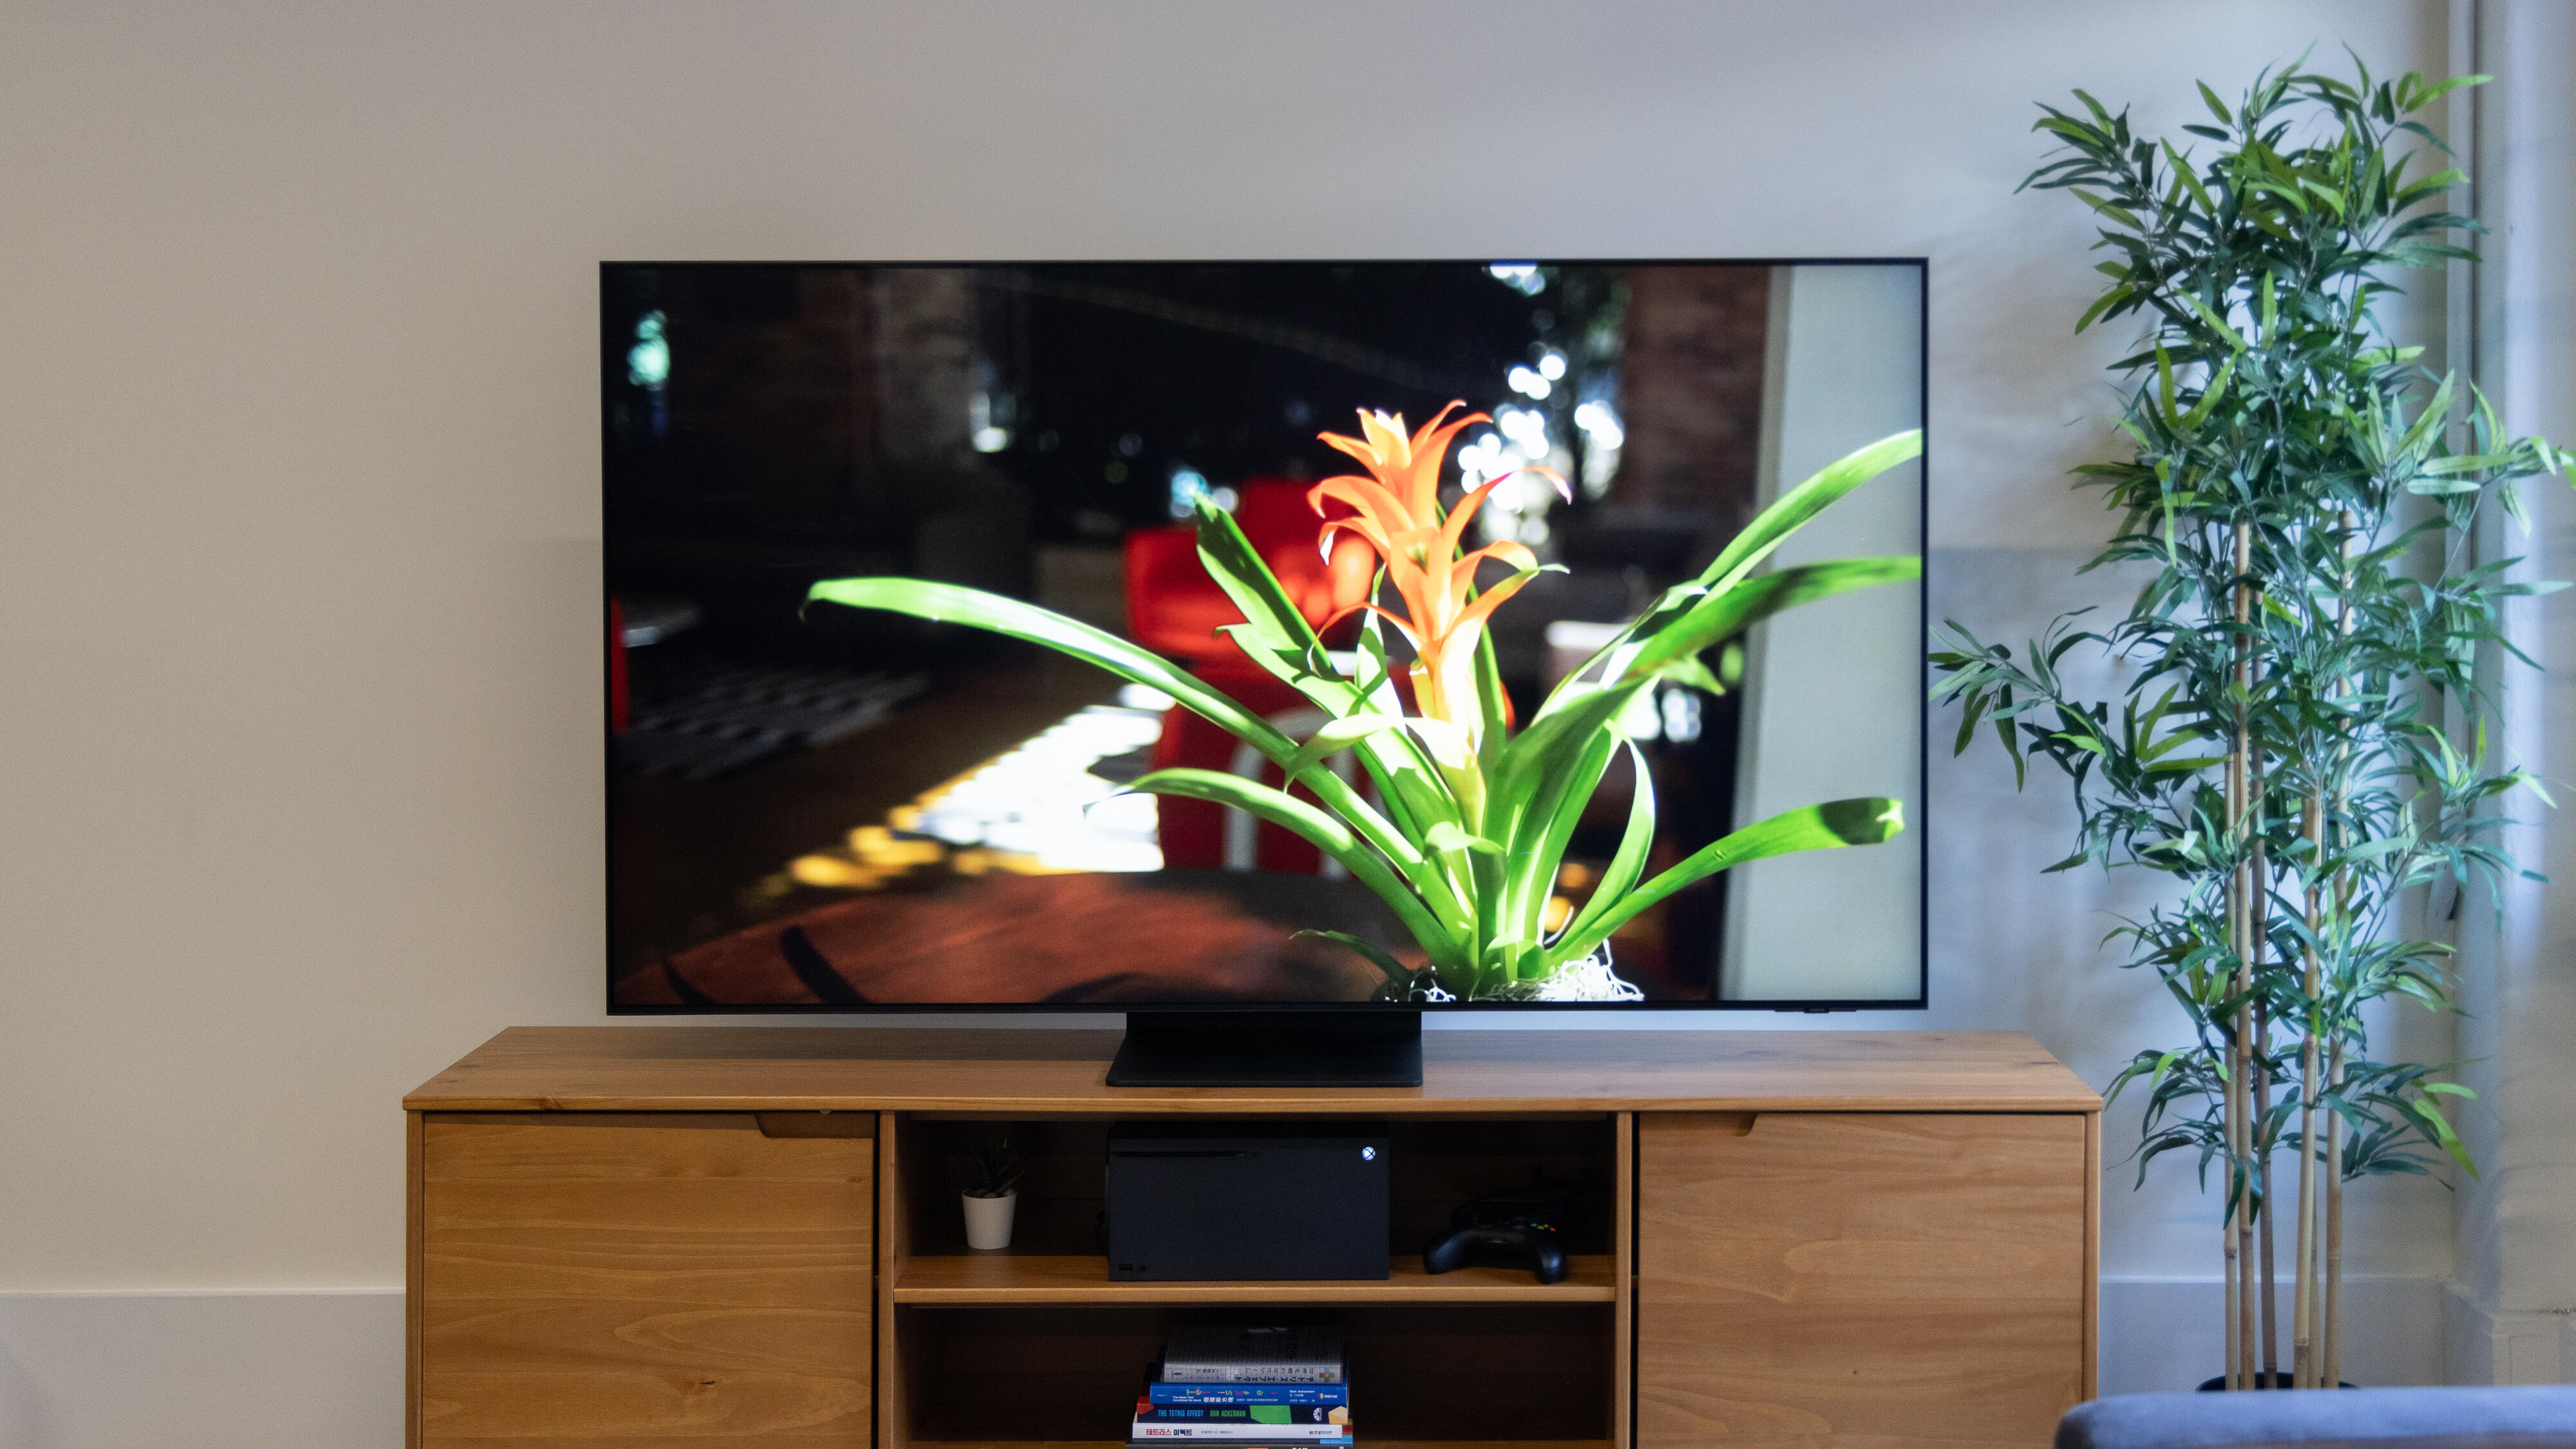 Philips PFL5907 series review: One of the better LED TV values - CNET